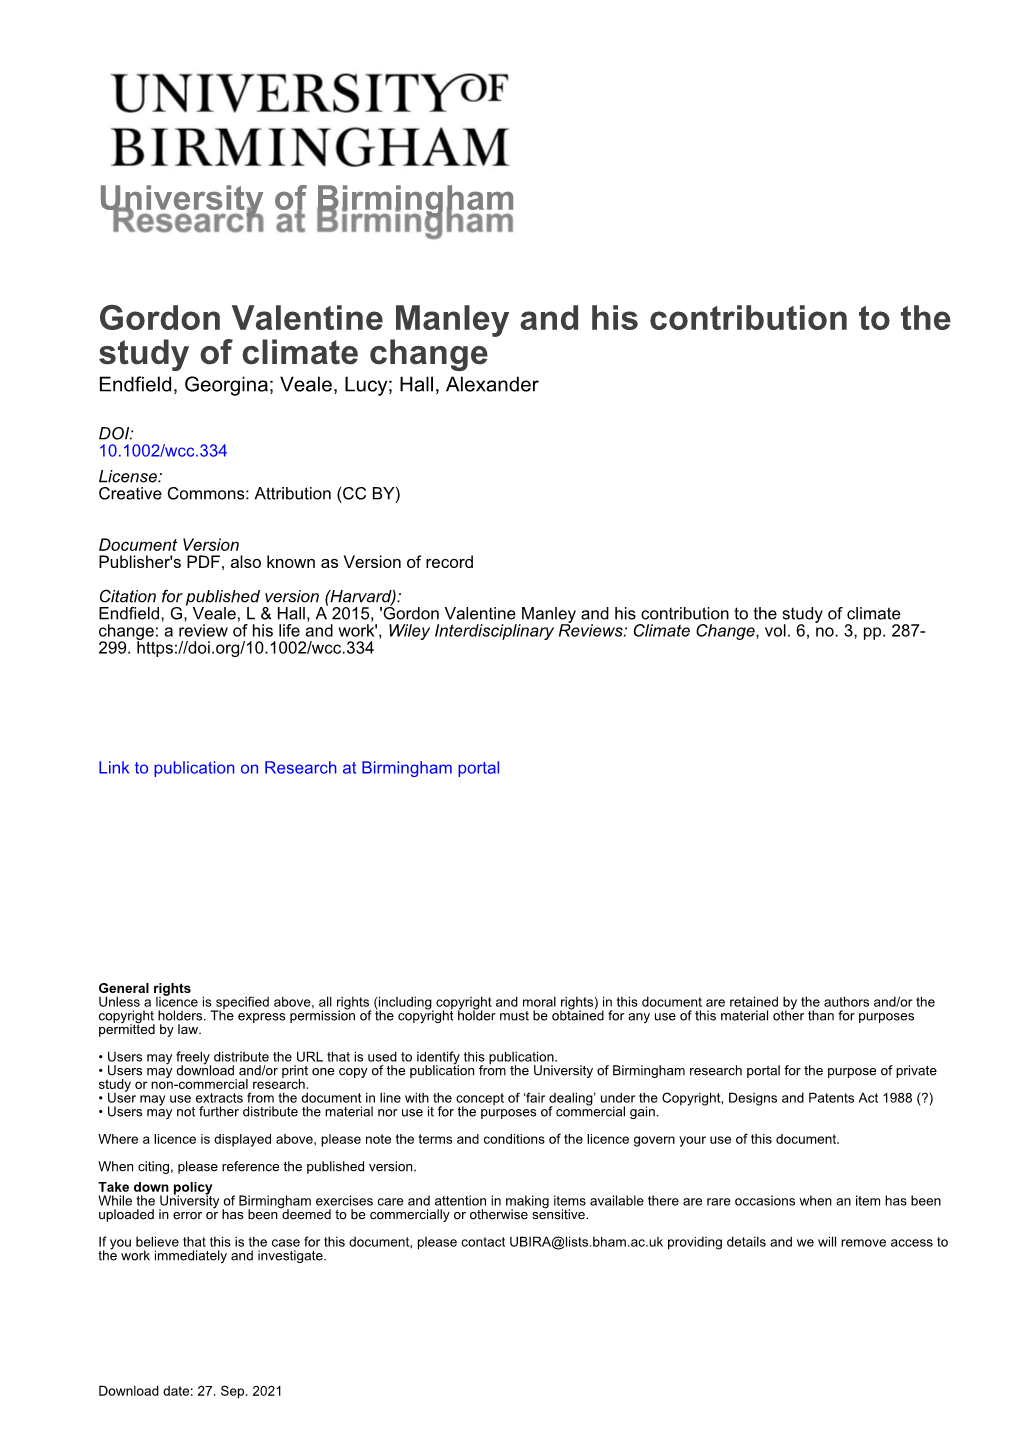 Gordon Valentine Manley and His Contribution to the Study of Climate Change Endfield, Georgina; Veale, Lucy; Hall, Alexander